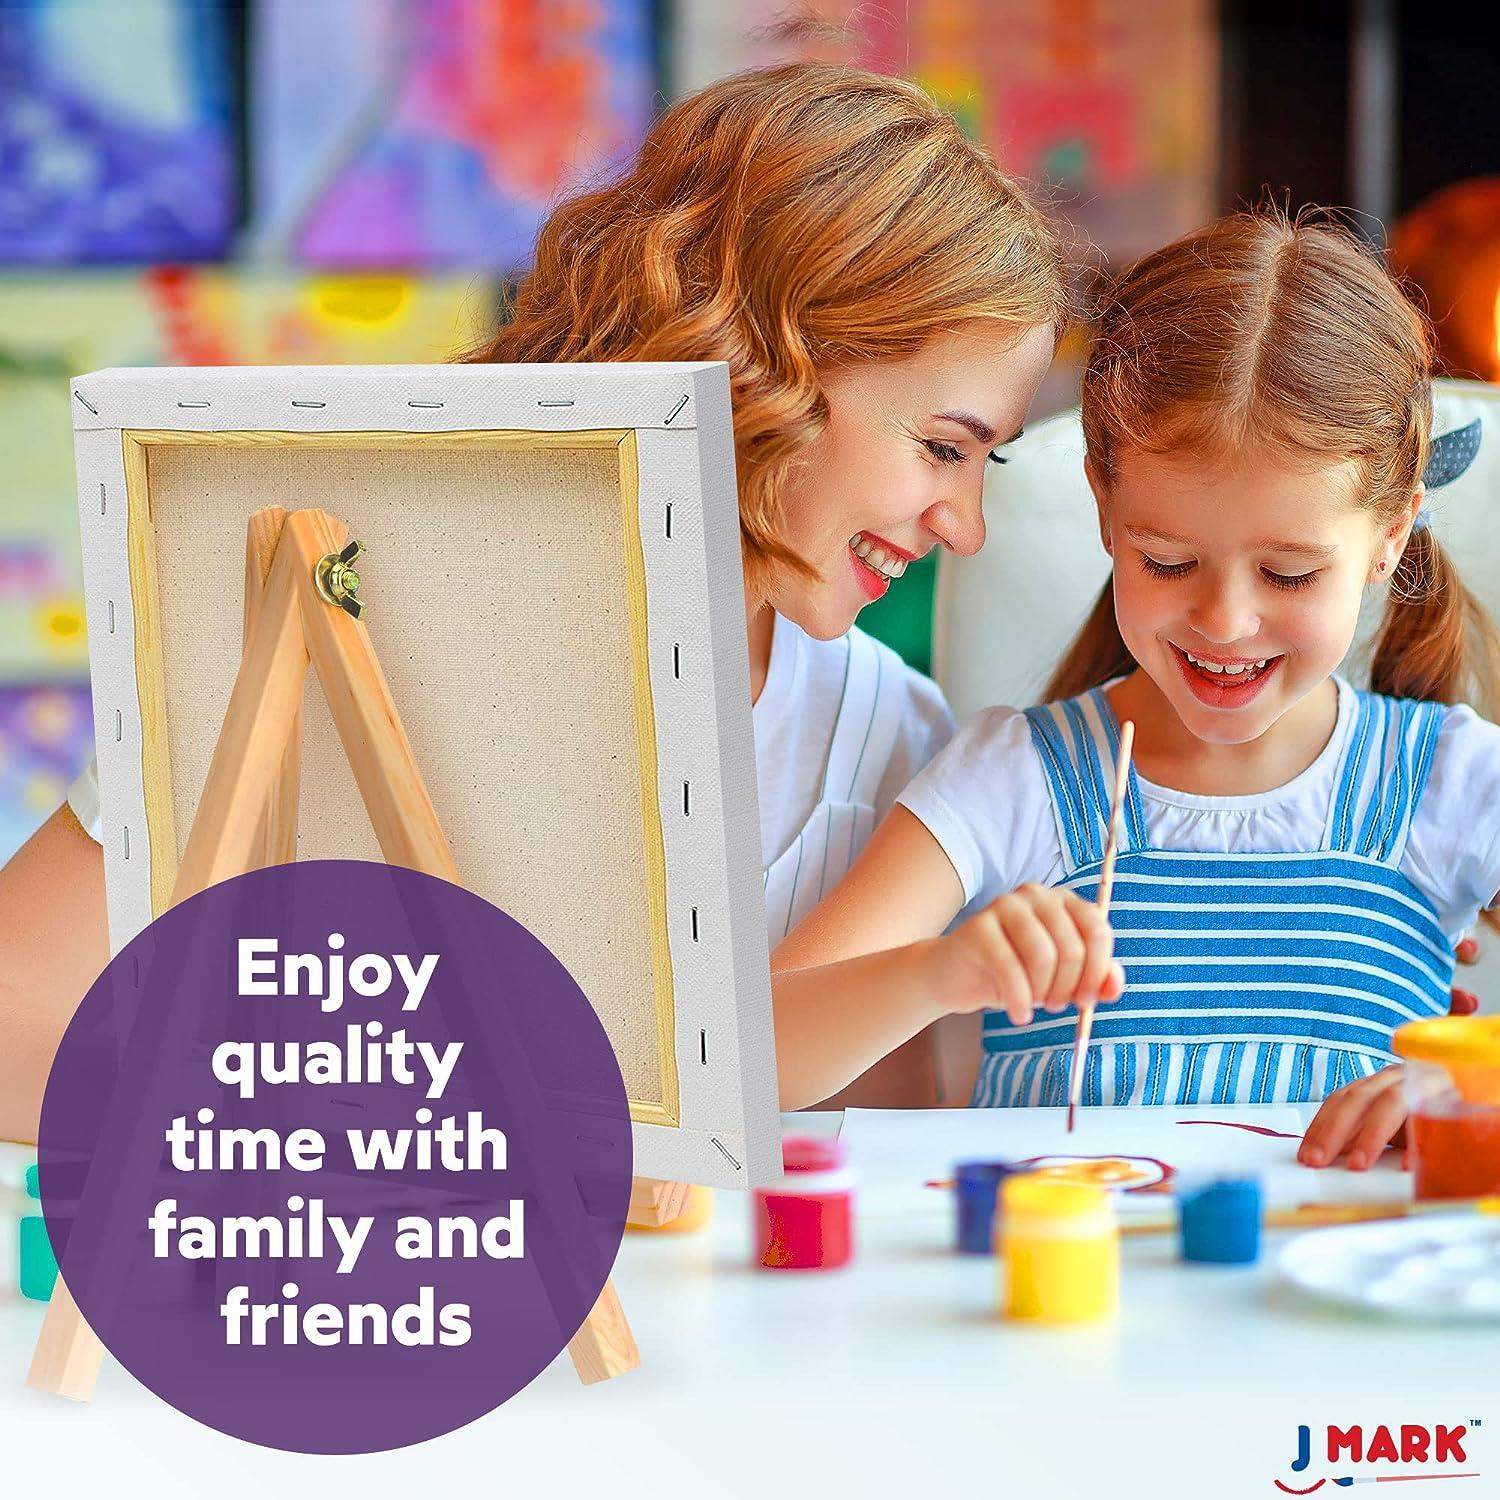 Canvas Painting Kit for Kids with Acrylic Paints, Wood Easels